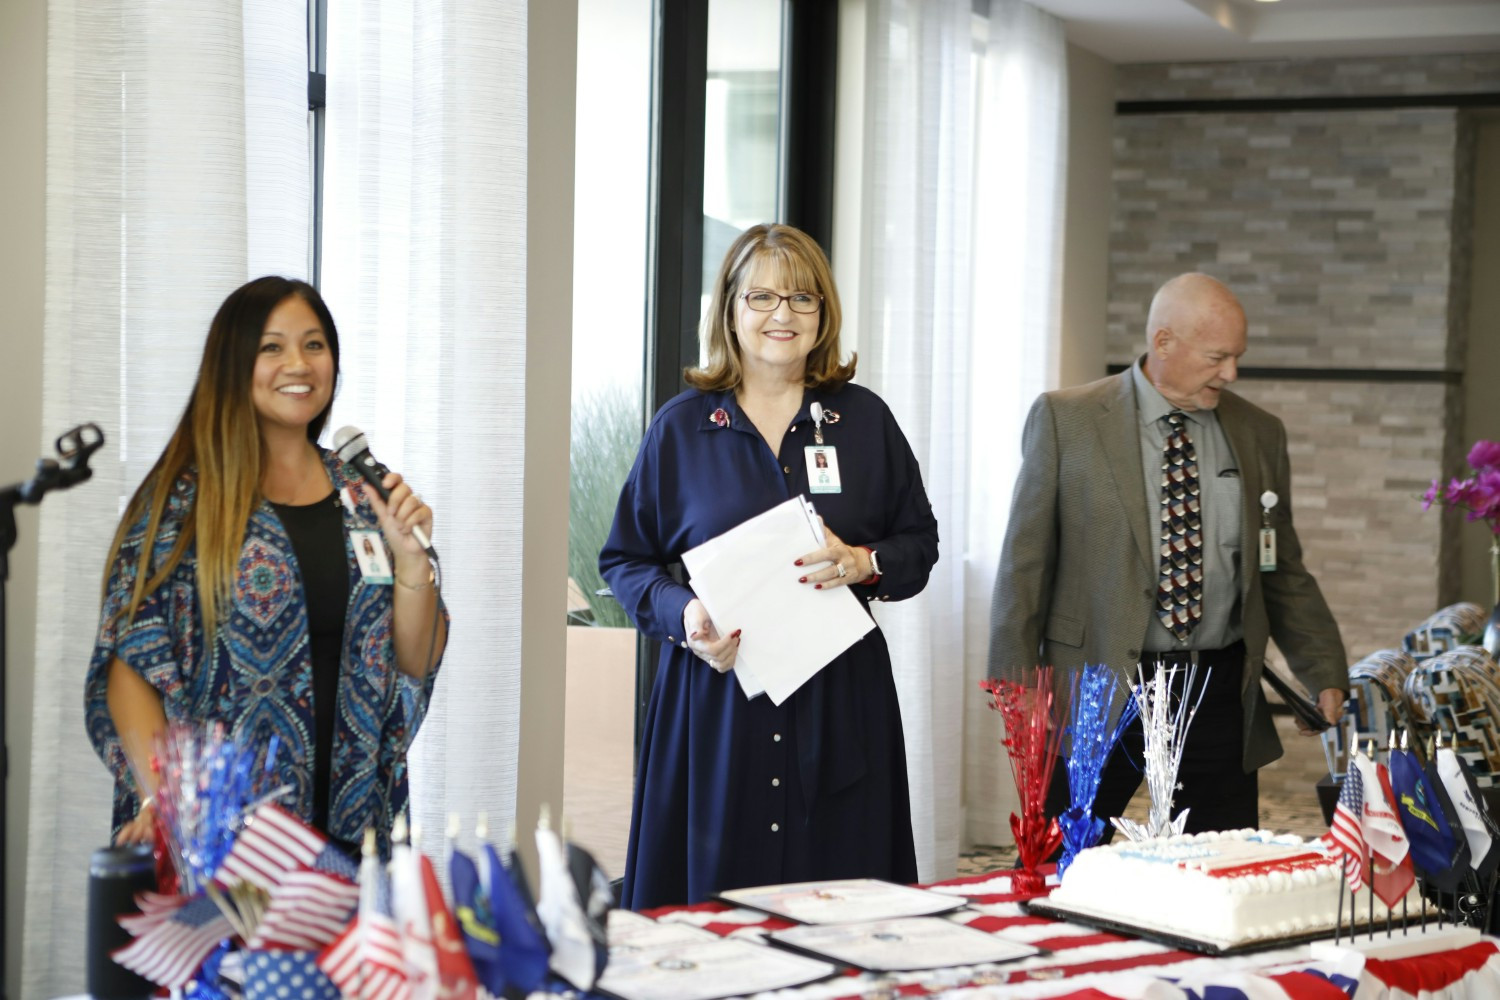 Acacia's Community Liaison, Director of Business Development, & Spiritual Counselor at Acacia's Honoring Veterans event.